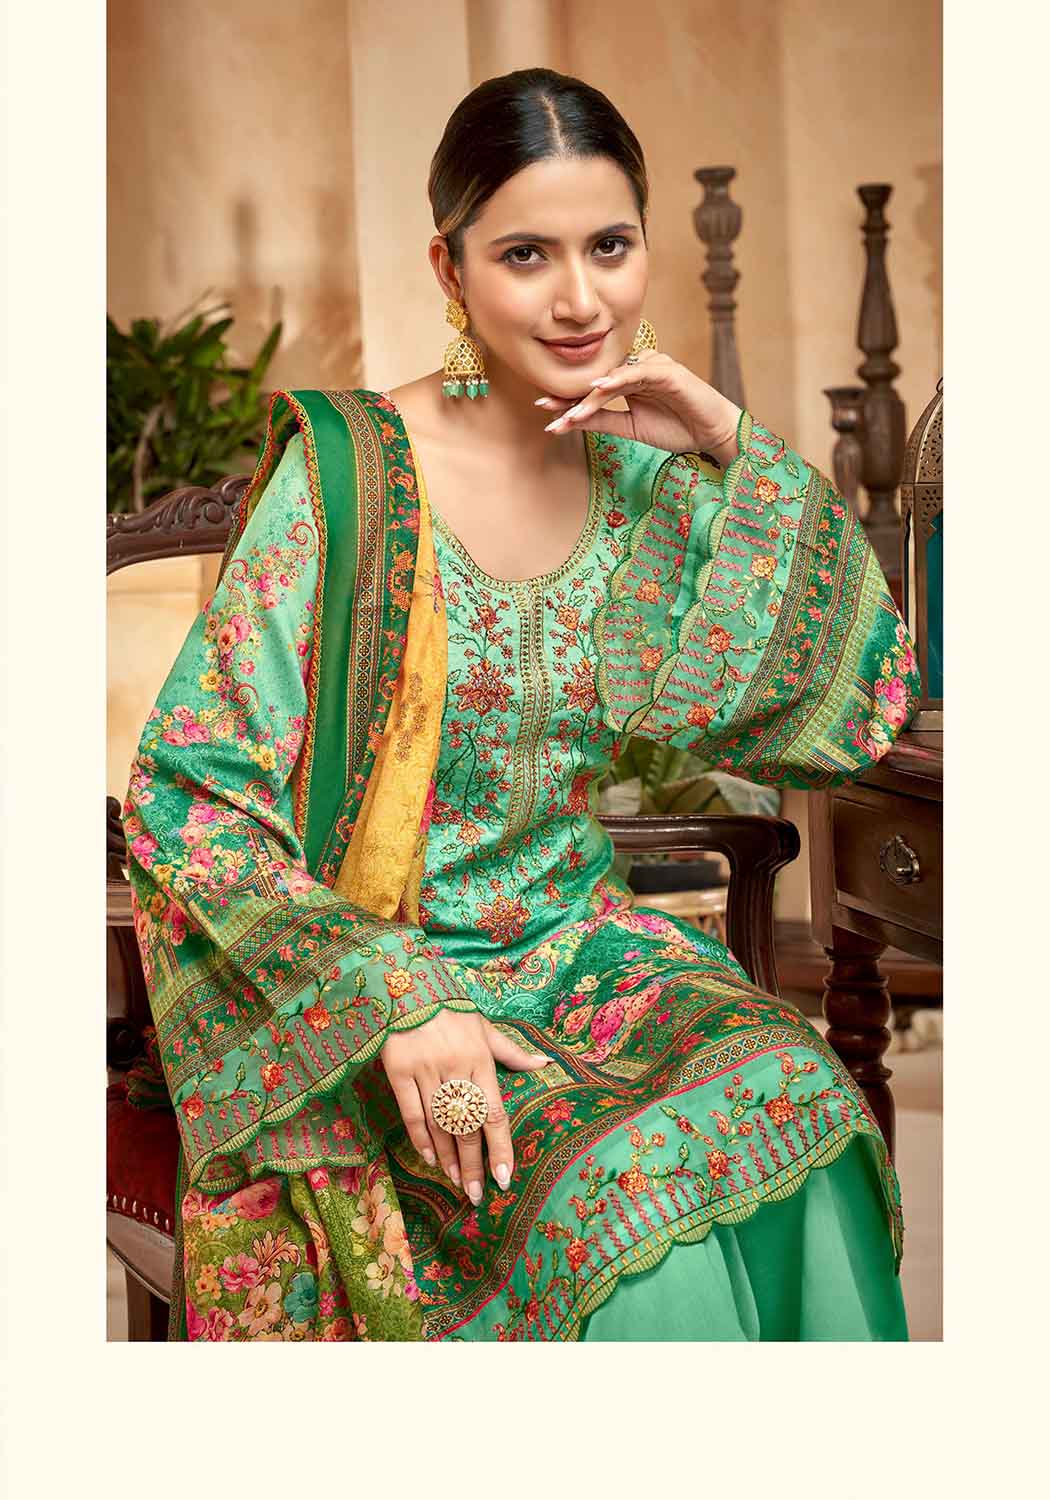 Unstitched Pakistani Print Cotton Suit Material with Embroidery Green